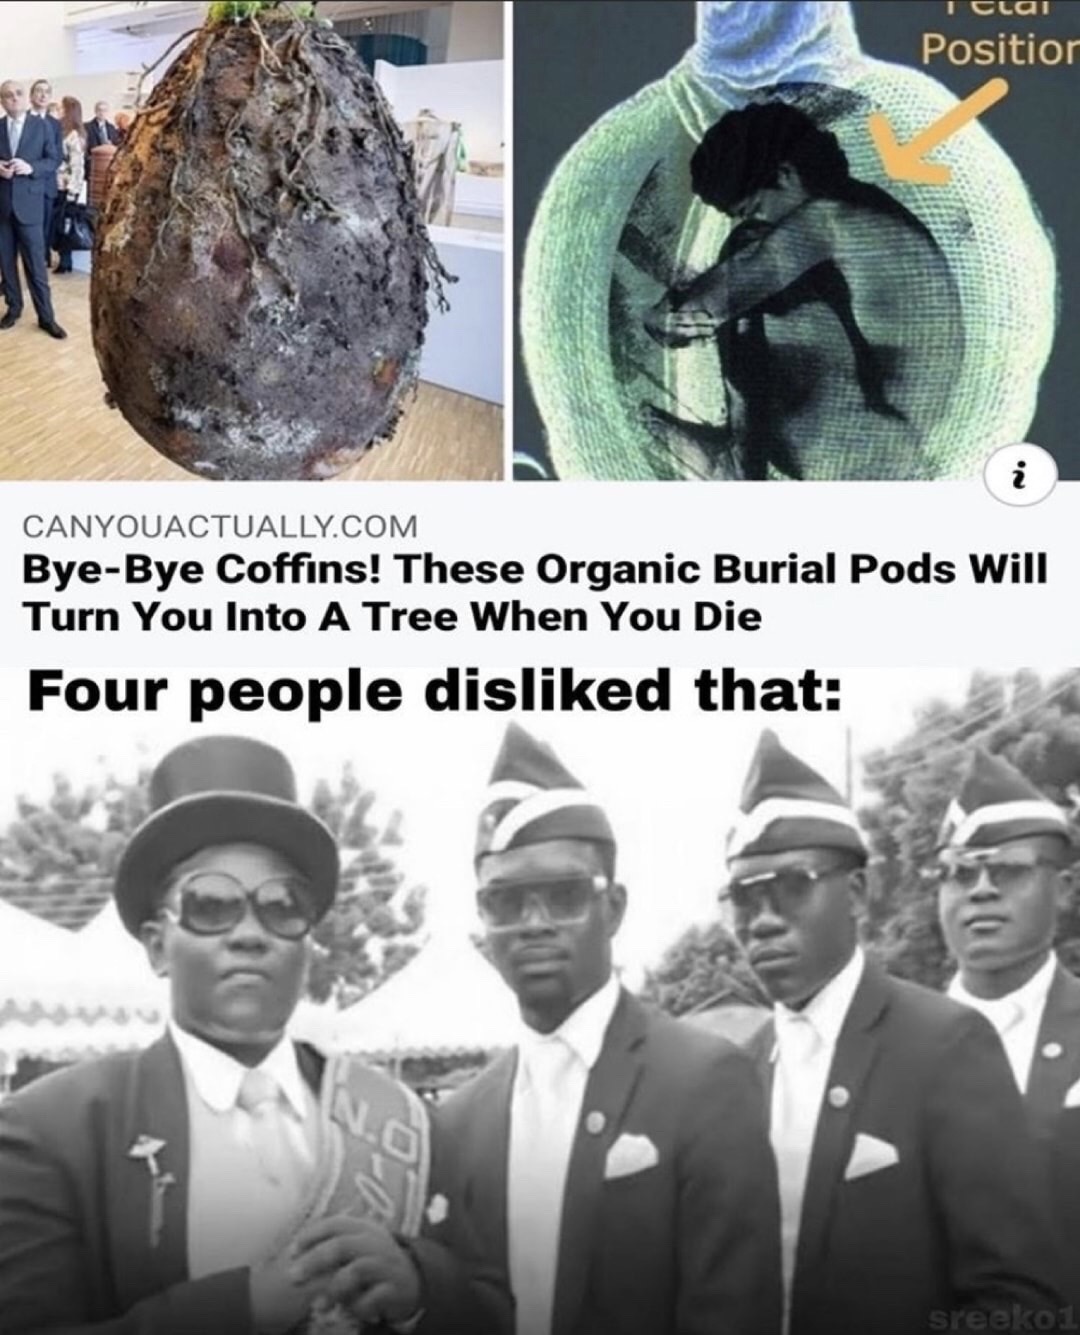 dancing pallbearers meme - Positior Canyouactually.Com ByeBye Coffins! These Organic Burial Pods Will Turn You Into A Tree When You Die Four people disd that sreeko1